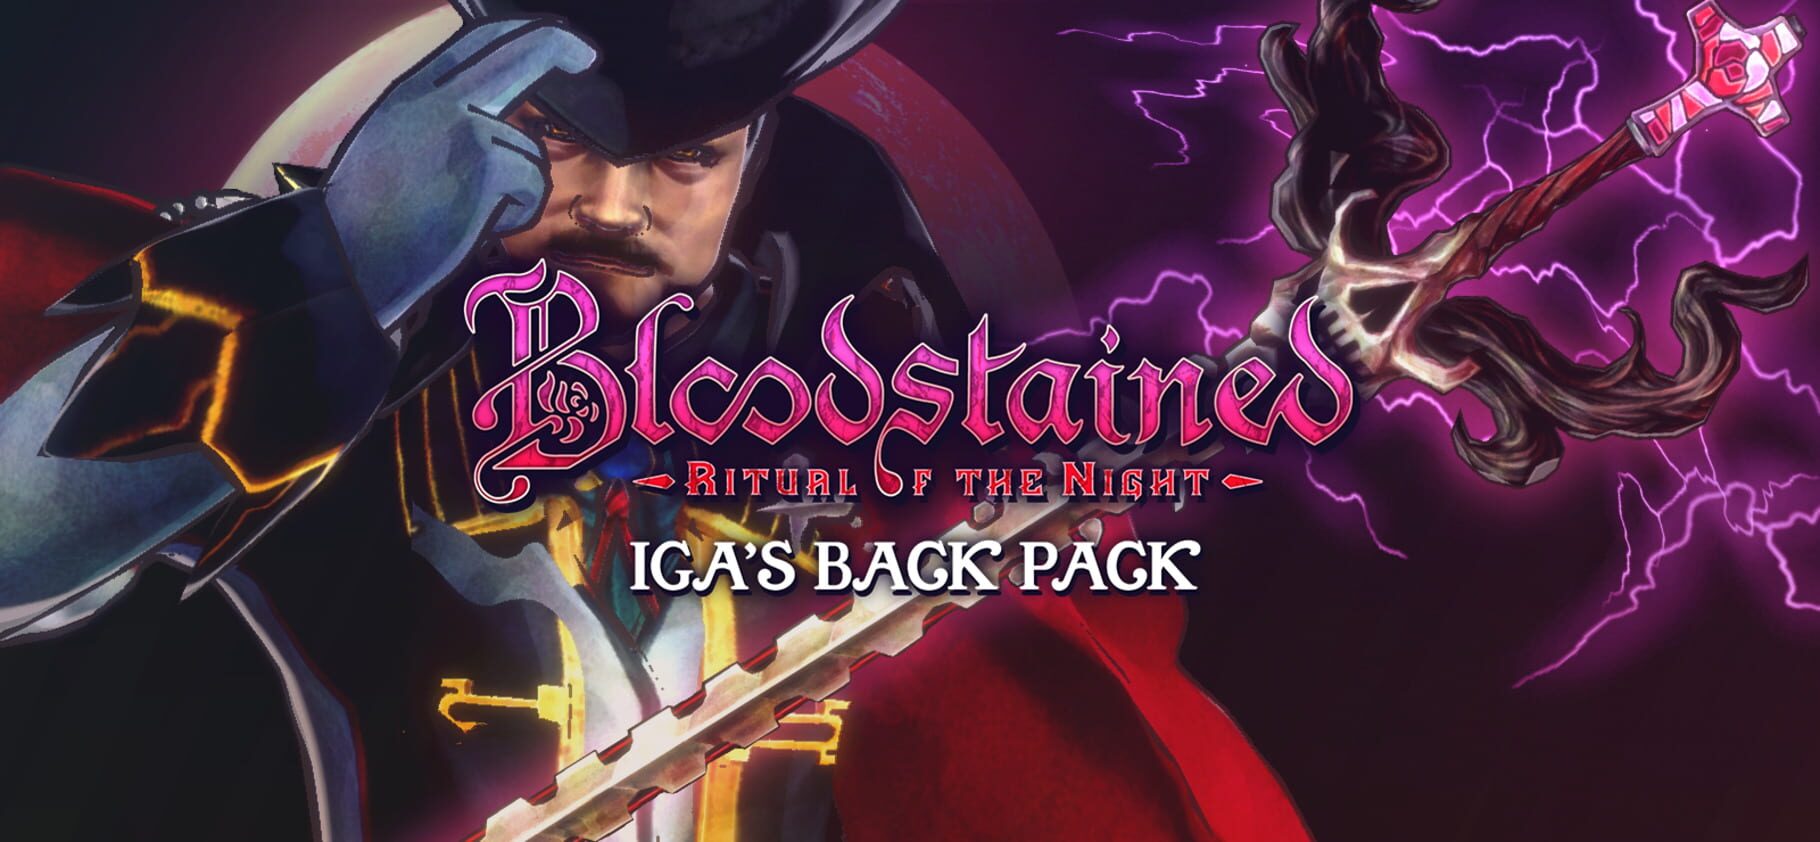 Bloodstained: Ritual of the Night - IGA's Back Pack artwork